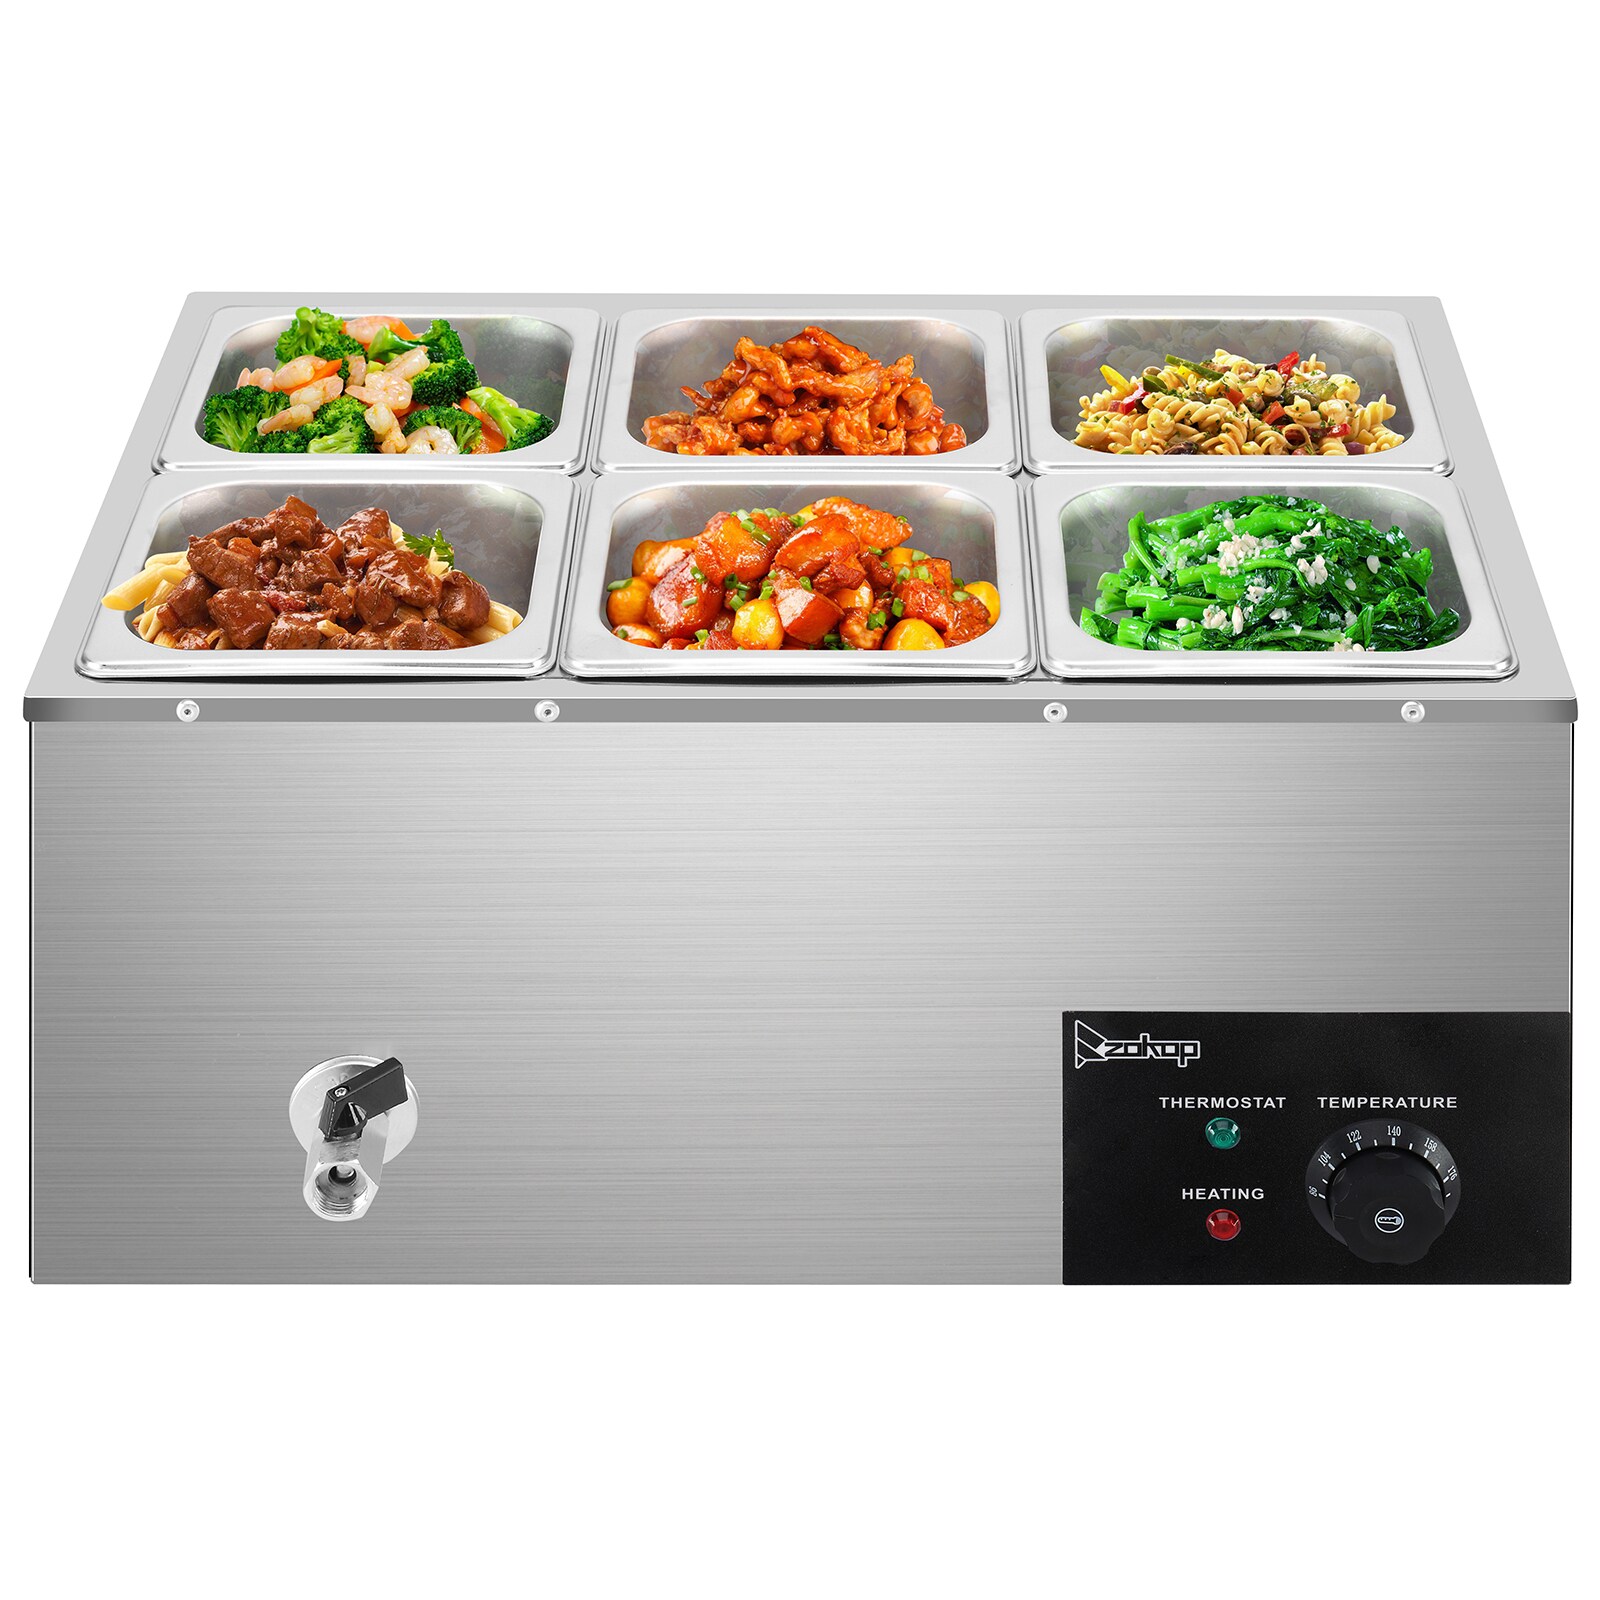 Bain Marie Buffet Food Warmer - Types, Uses, and Benefits